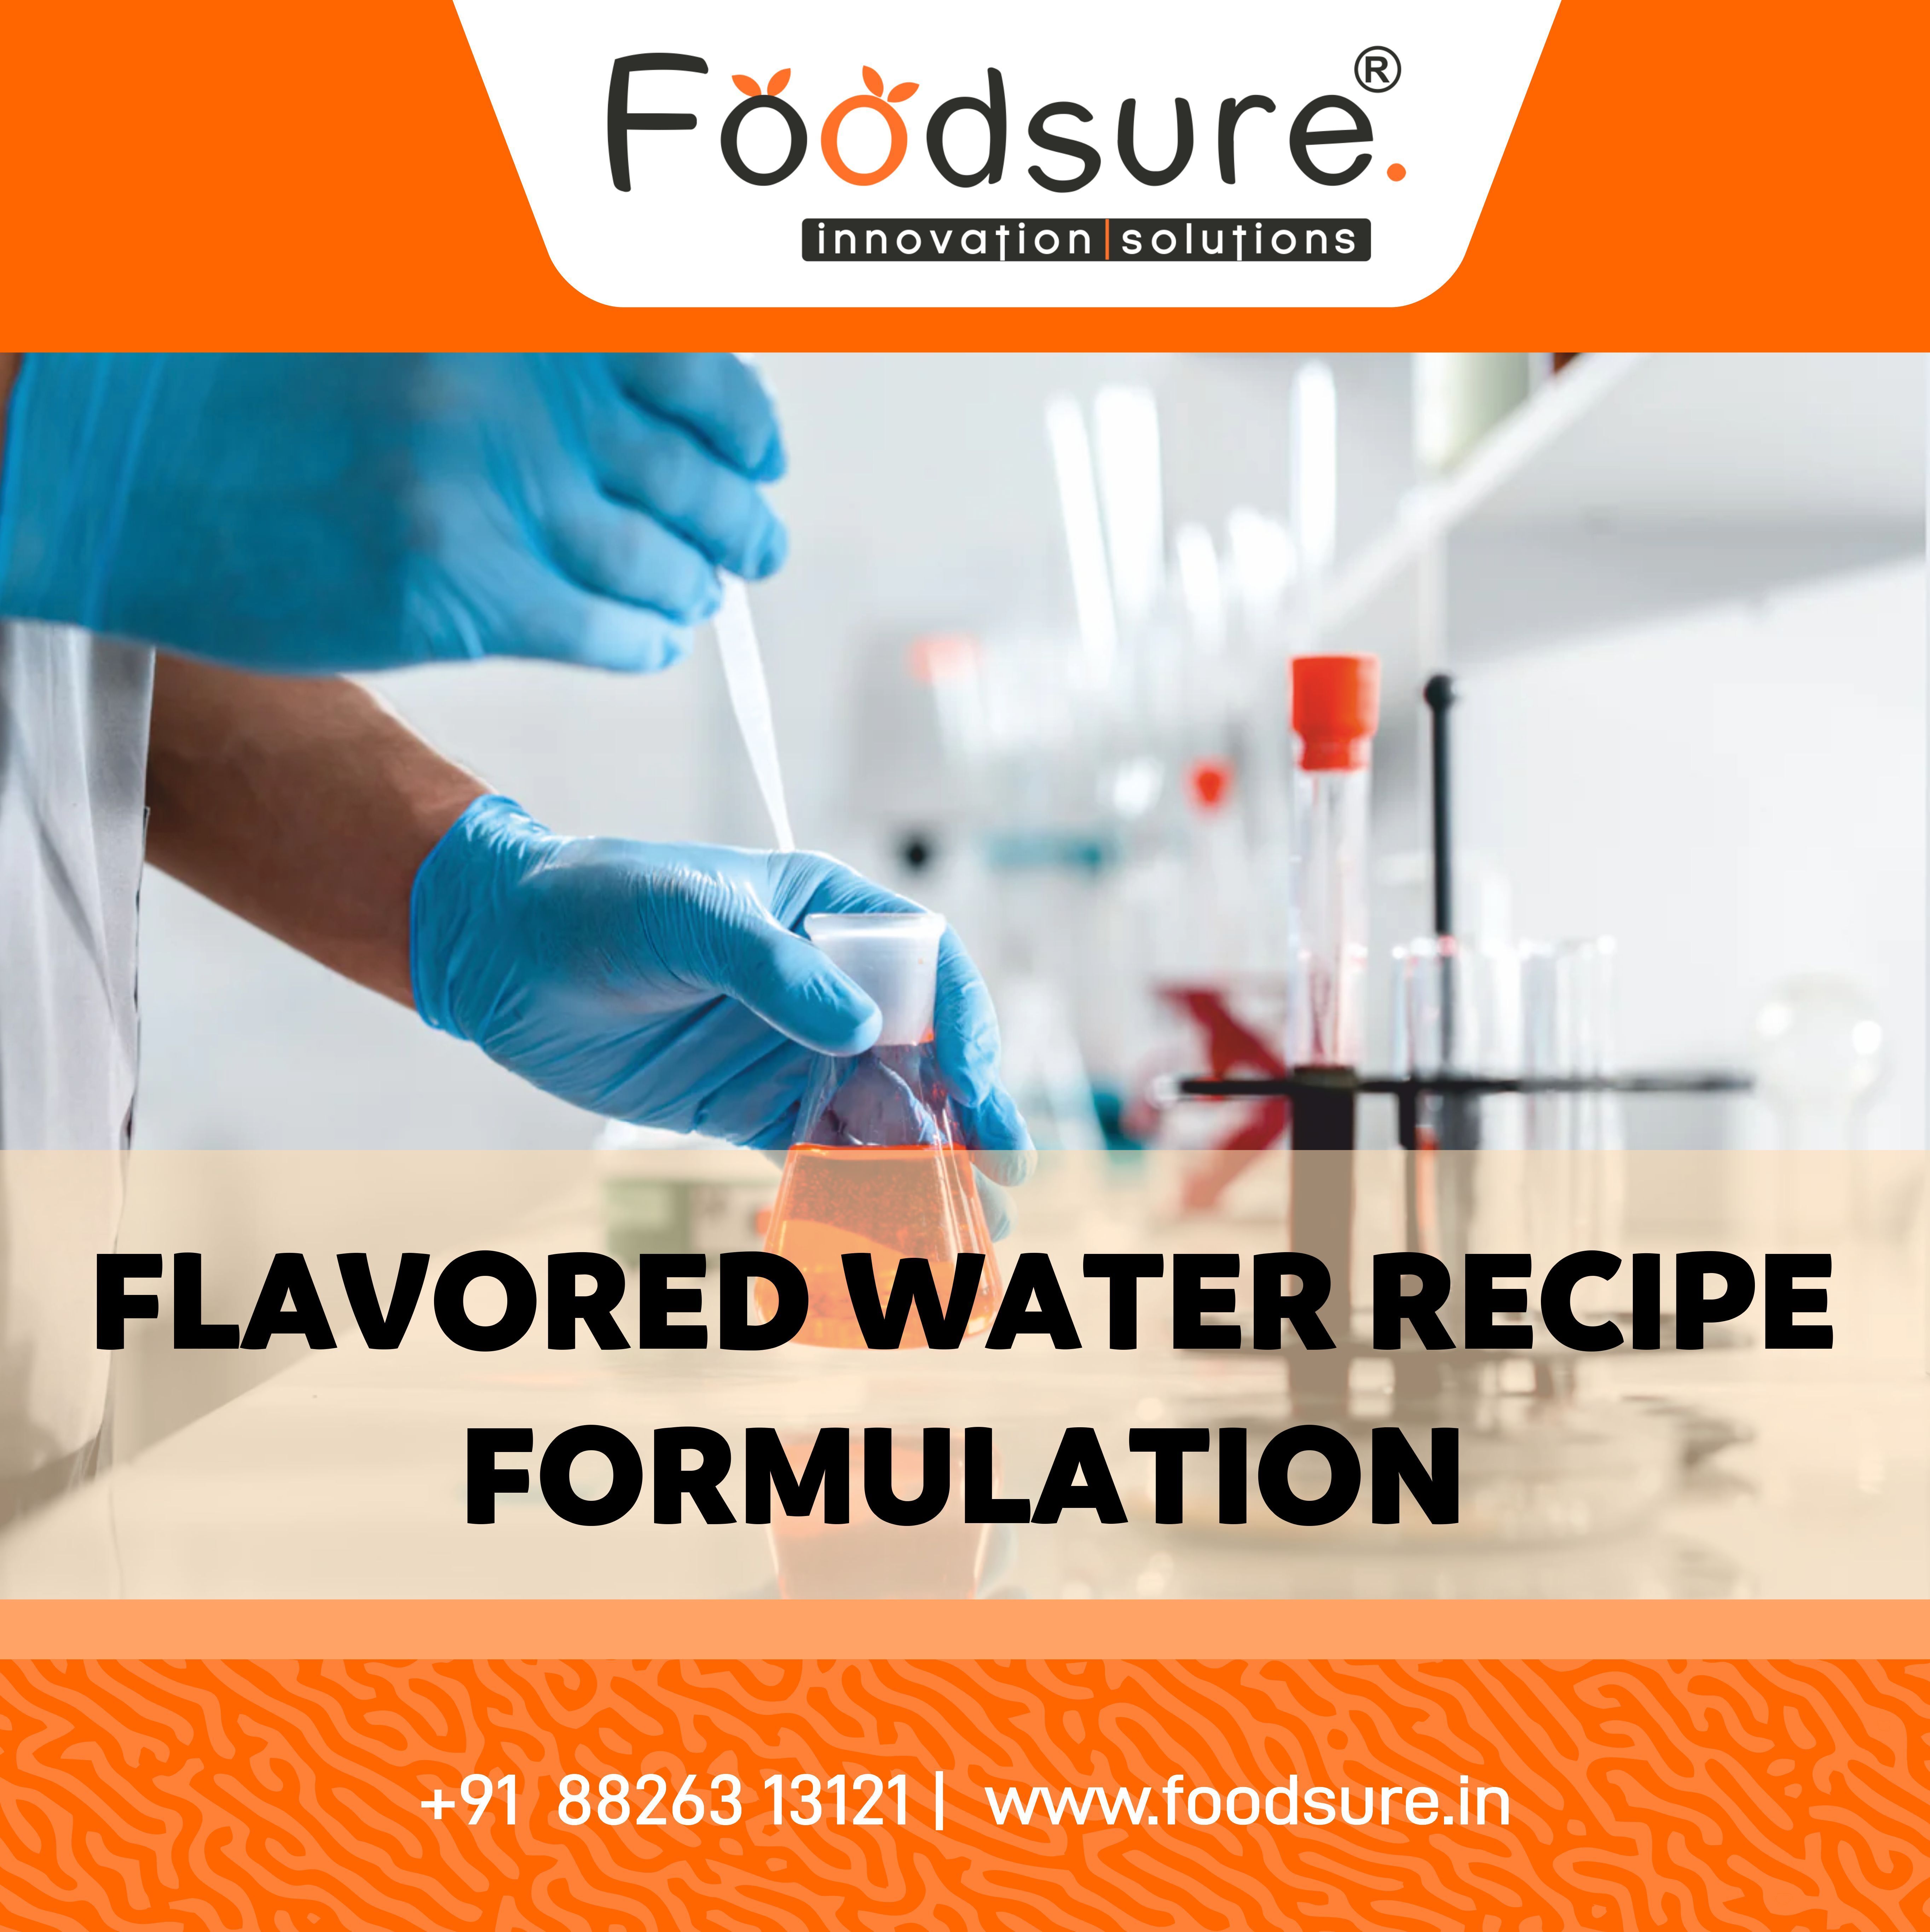 Flavored Waters Recipe Formulation